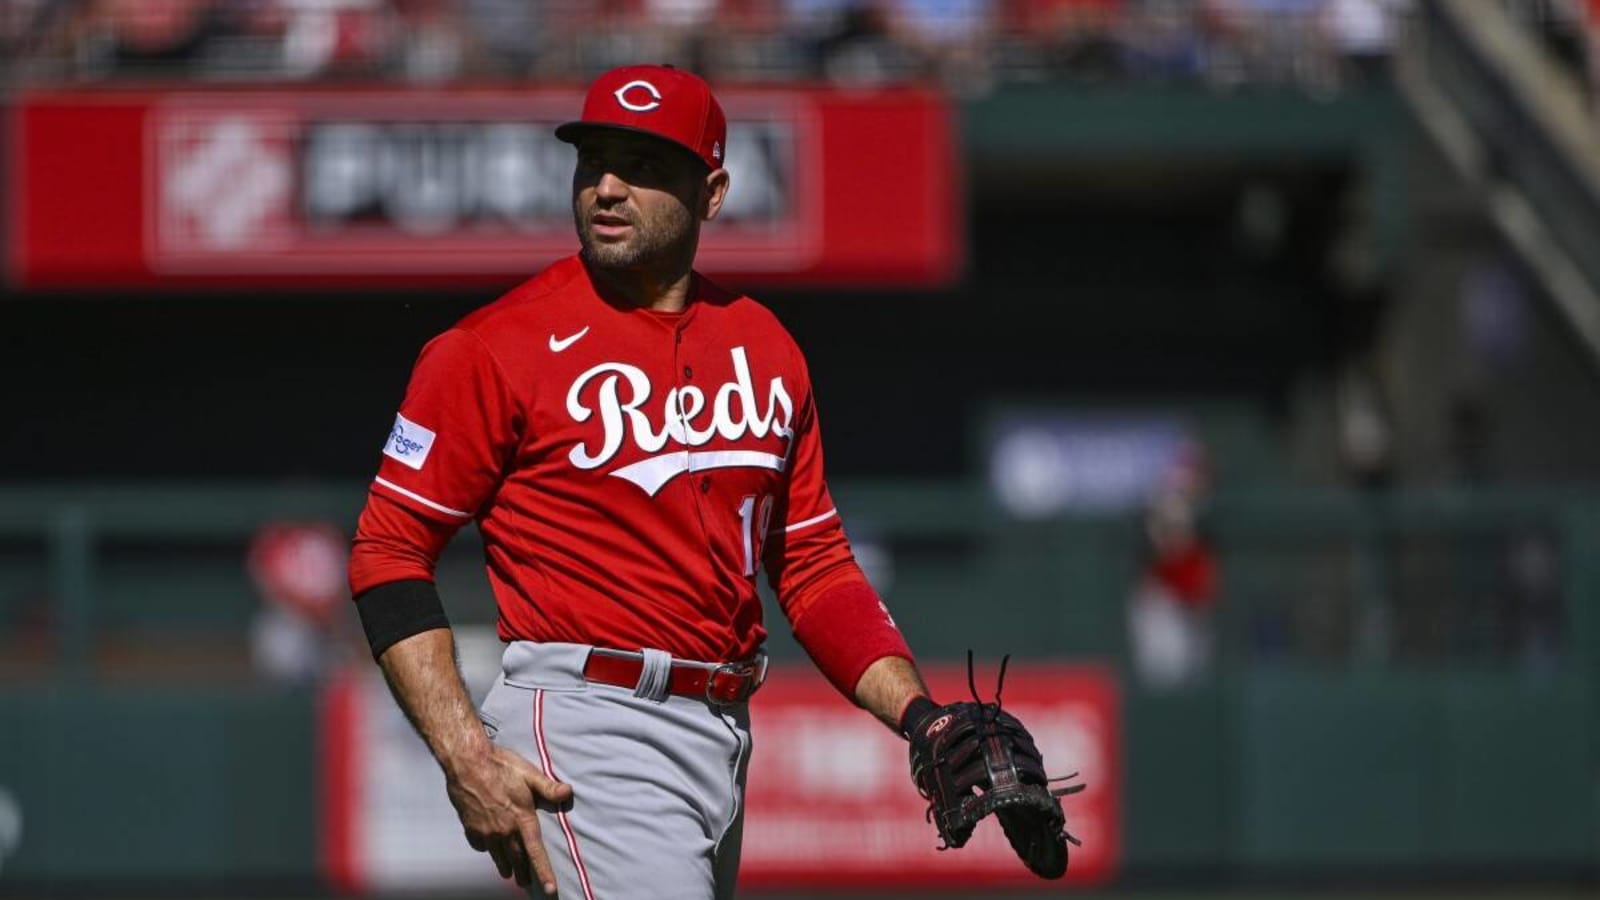 Joey Votto Shares Update About Playing Status With Regular Season Looming